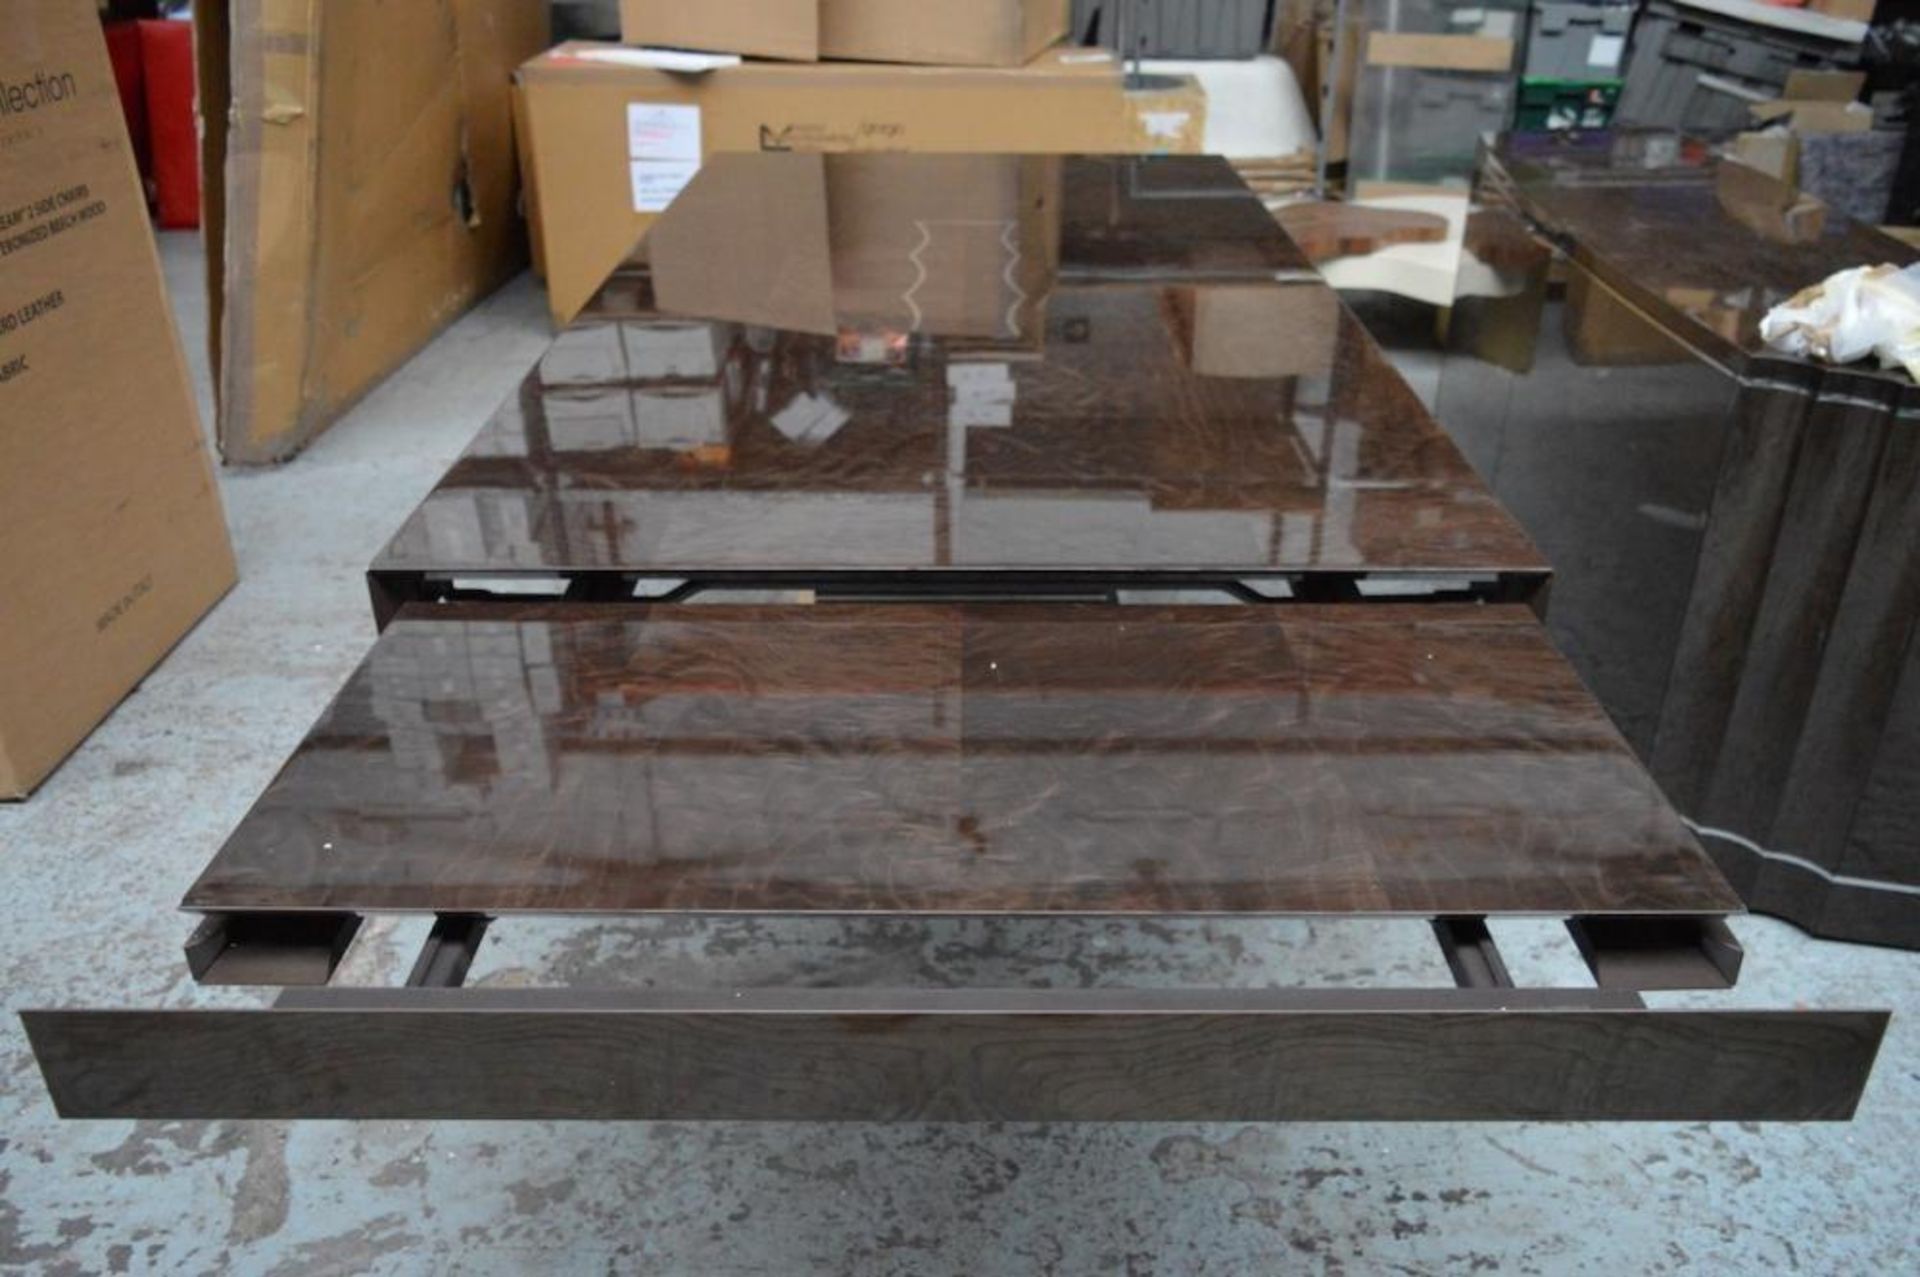 1 x Giorgio Absolute Dining Extension Table 4000 – Mako Japanese Tamos Burl Veneer With a High Gloss - Image 3 of 24